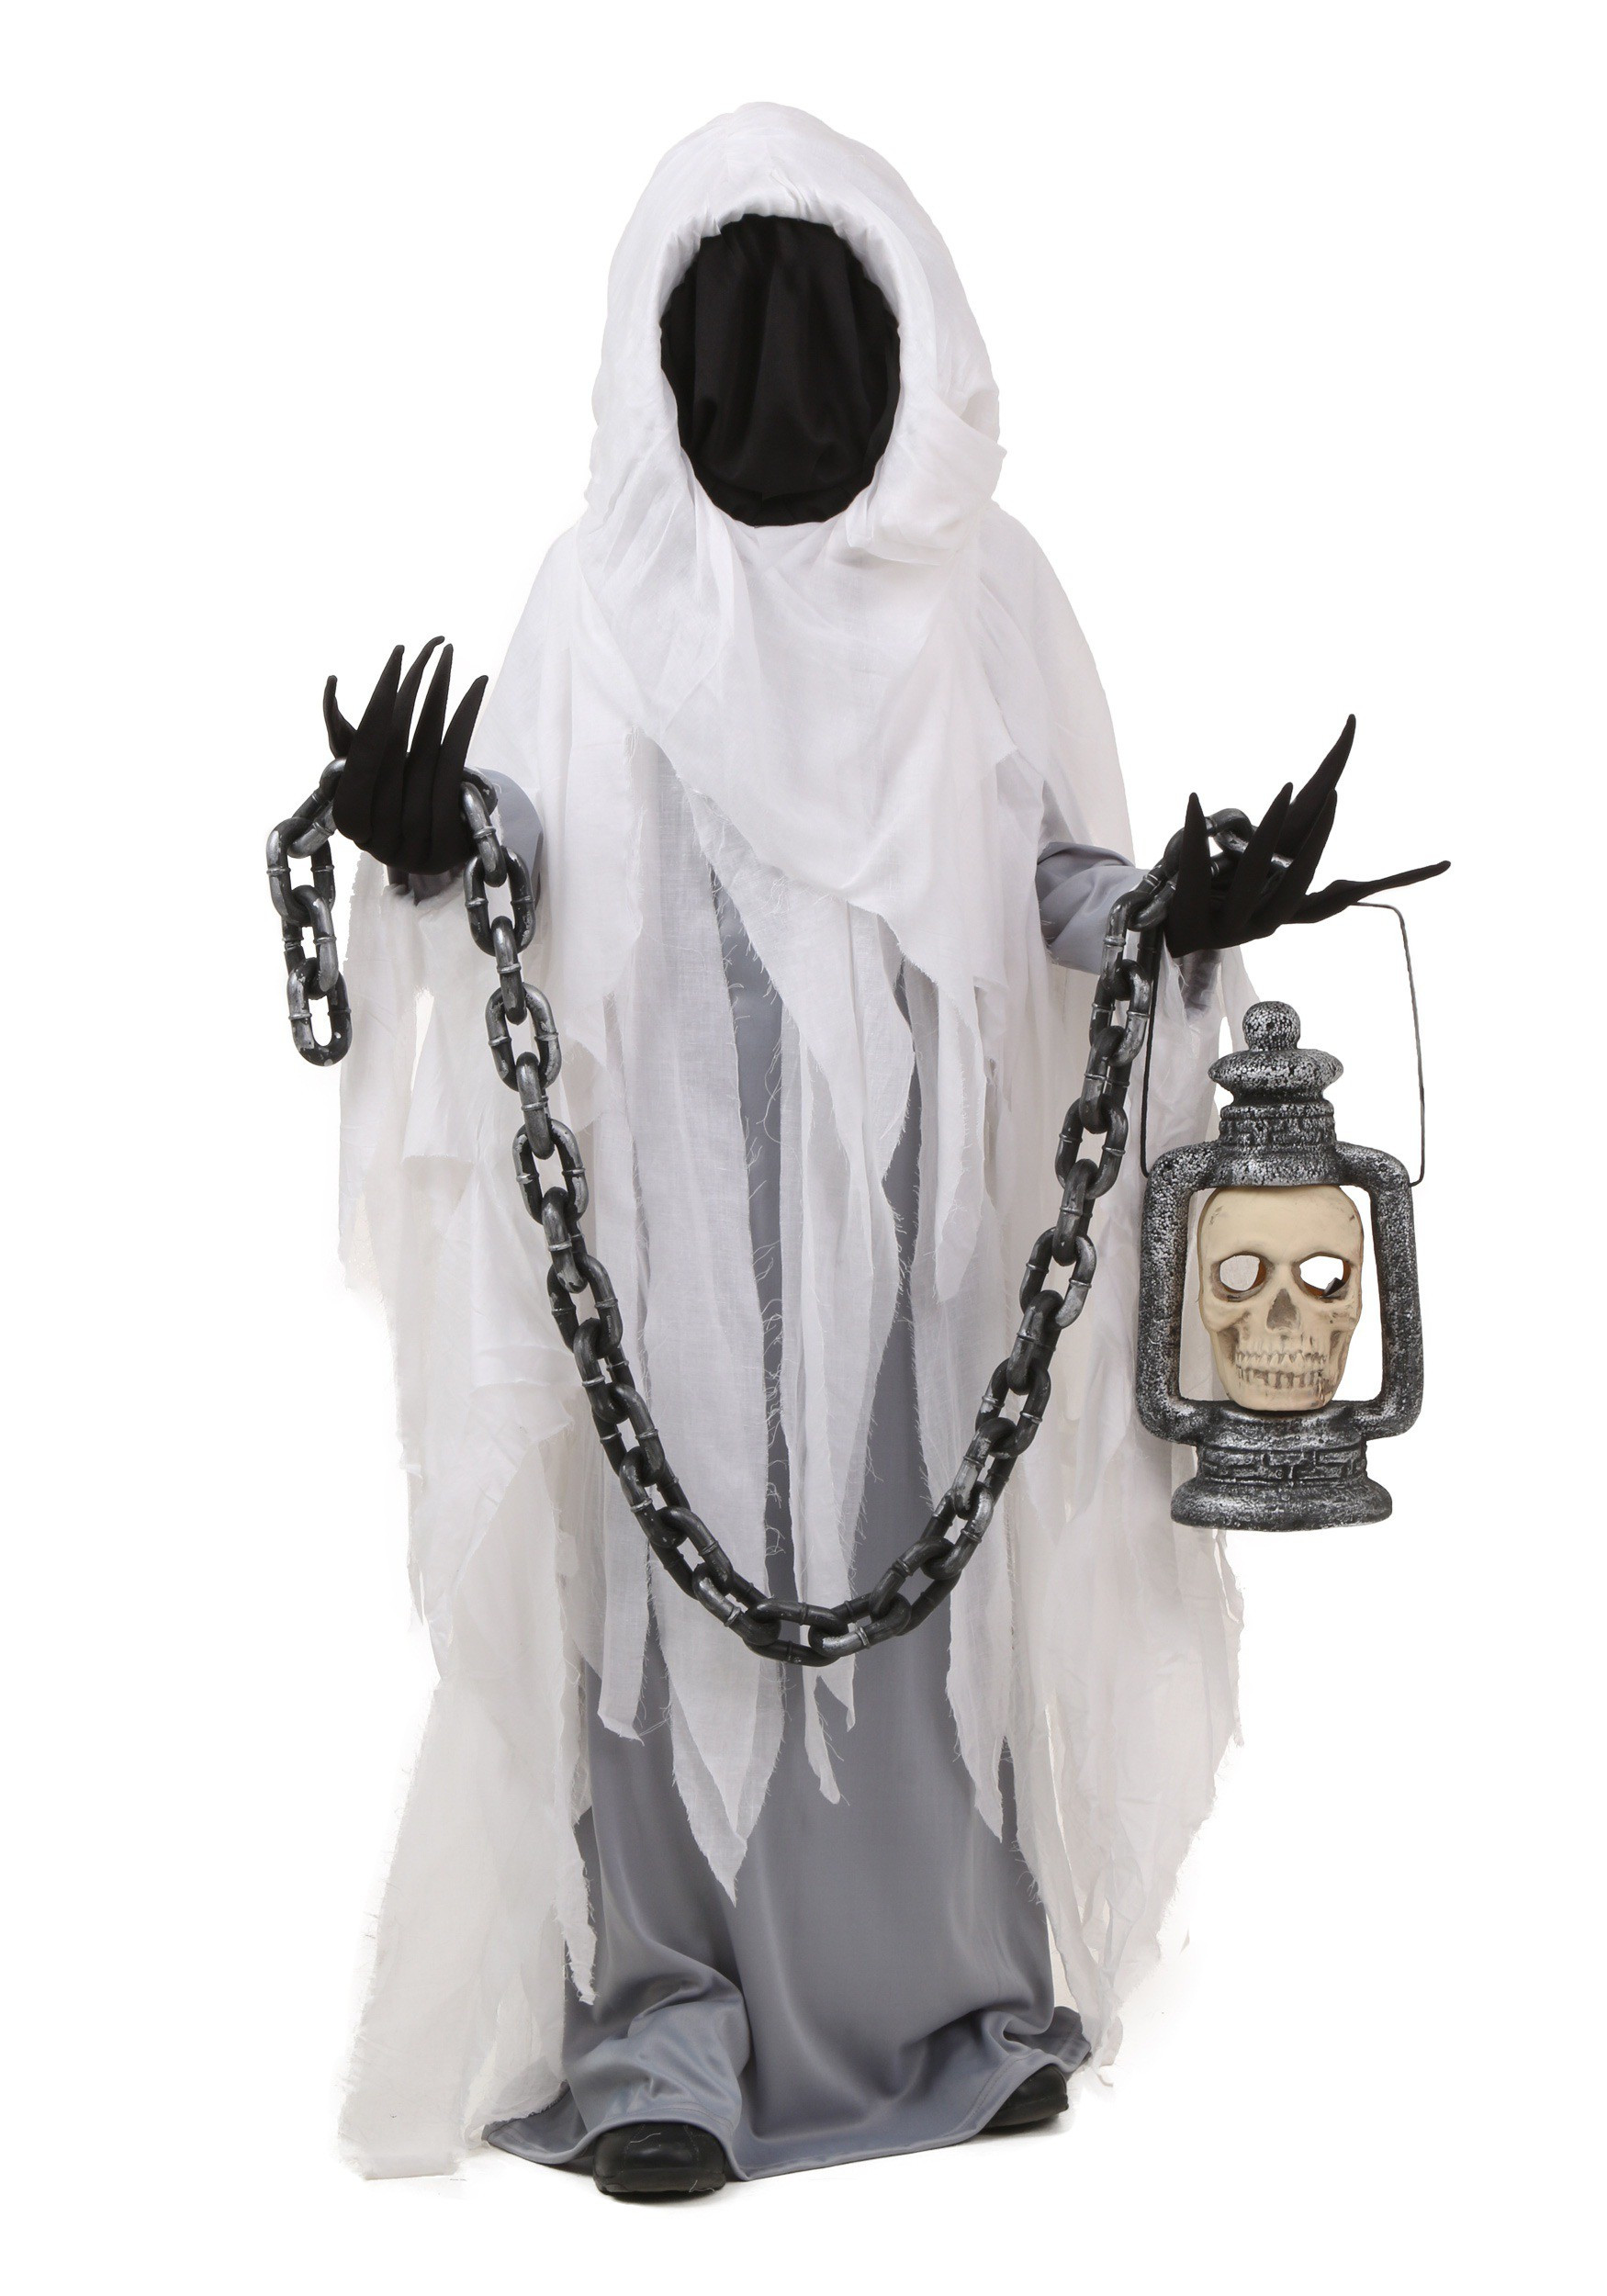 DIY Ghost Costume For Toddler
 Child Spooky Ghost Costume